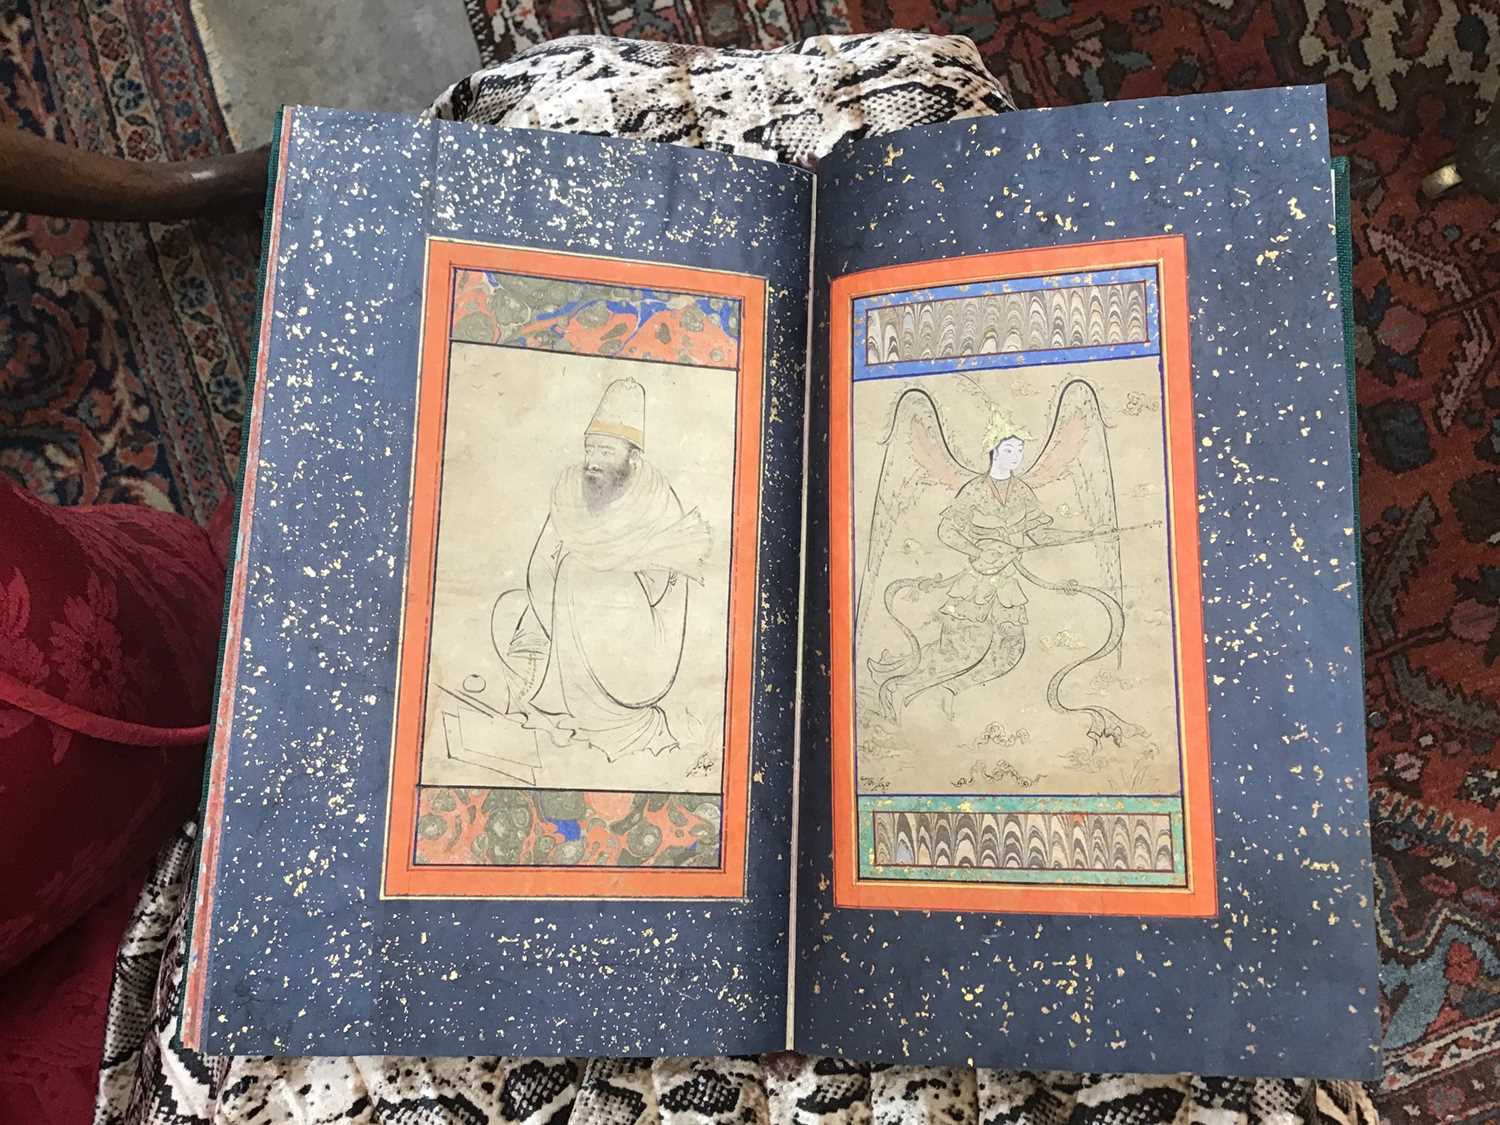 Fine Antique hand bound and written Islamic poetry book - poem by Sufi Khoja Ahmed Yassavi - Image 35 of 40